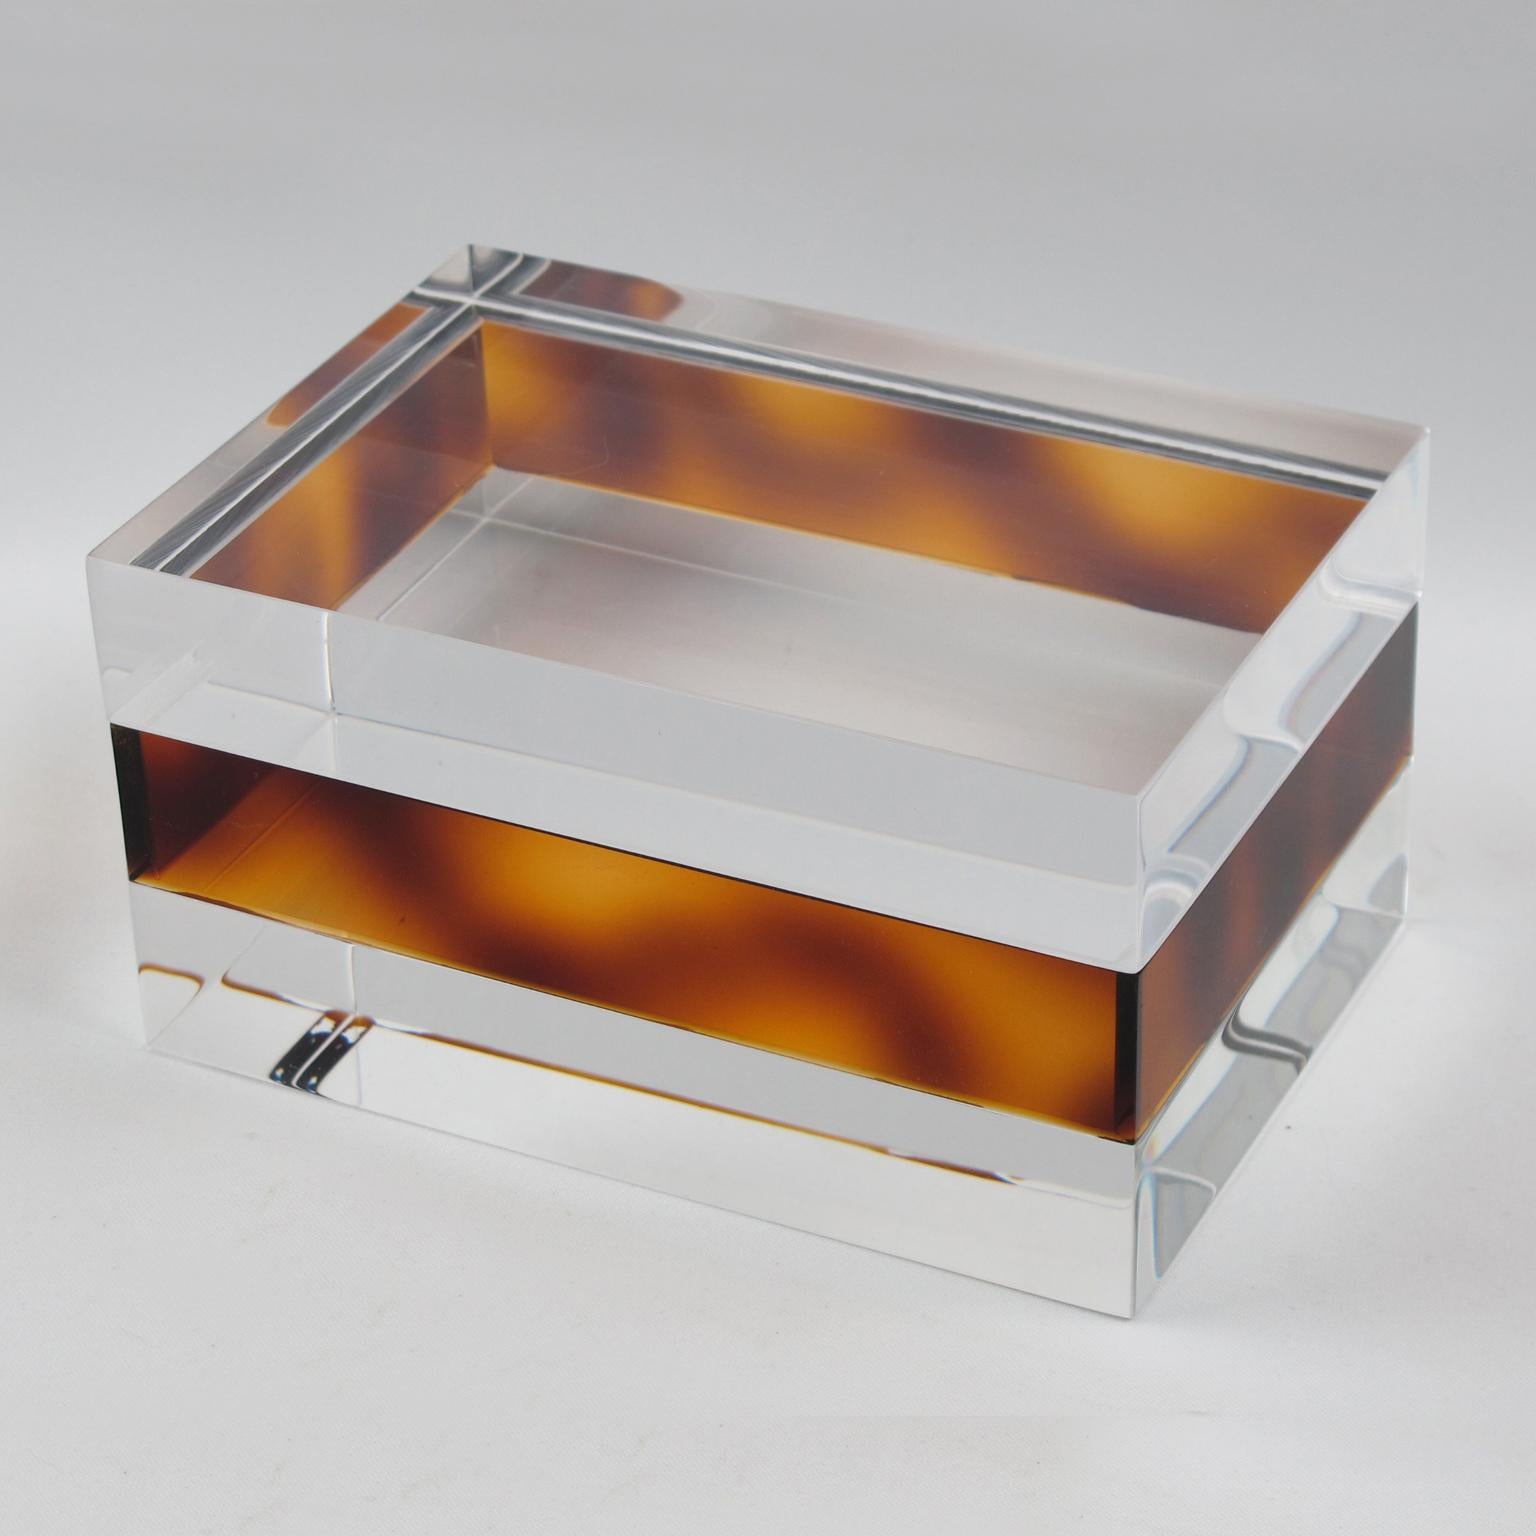 Lovely 1970s French Lucite lidded box. Transparent and faux-tortoiseshell (tortoise) colors paired with a geometric rectangular shape have built a gorgeous design. There is no visible maker's mark.
Measurements: 6.69 in. wide (17 cm) x 4.50 in.